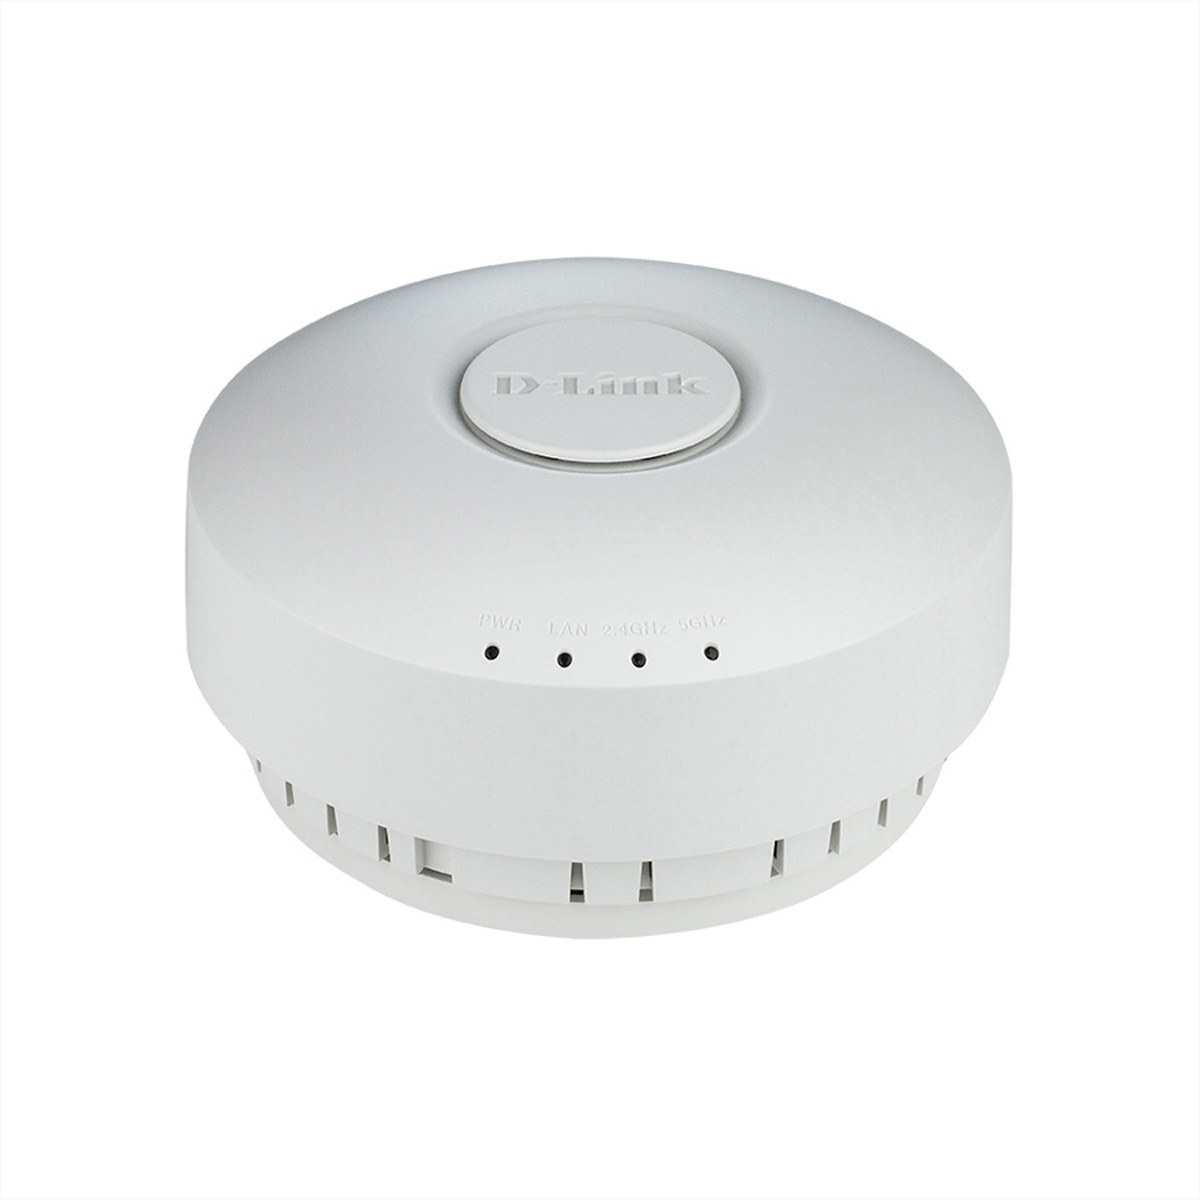 AC1200 Dualband Point DWL-6610AP Points WLAN Access 1,2 Access Unified D-LINK Gbit/s